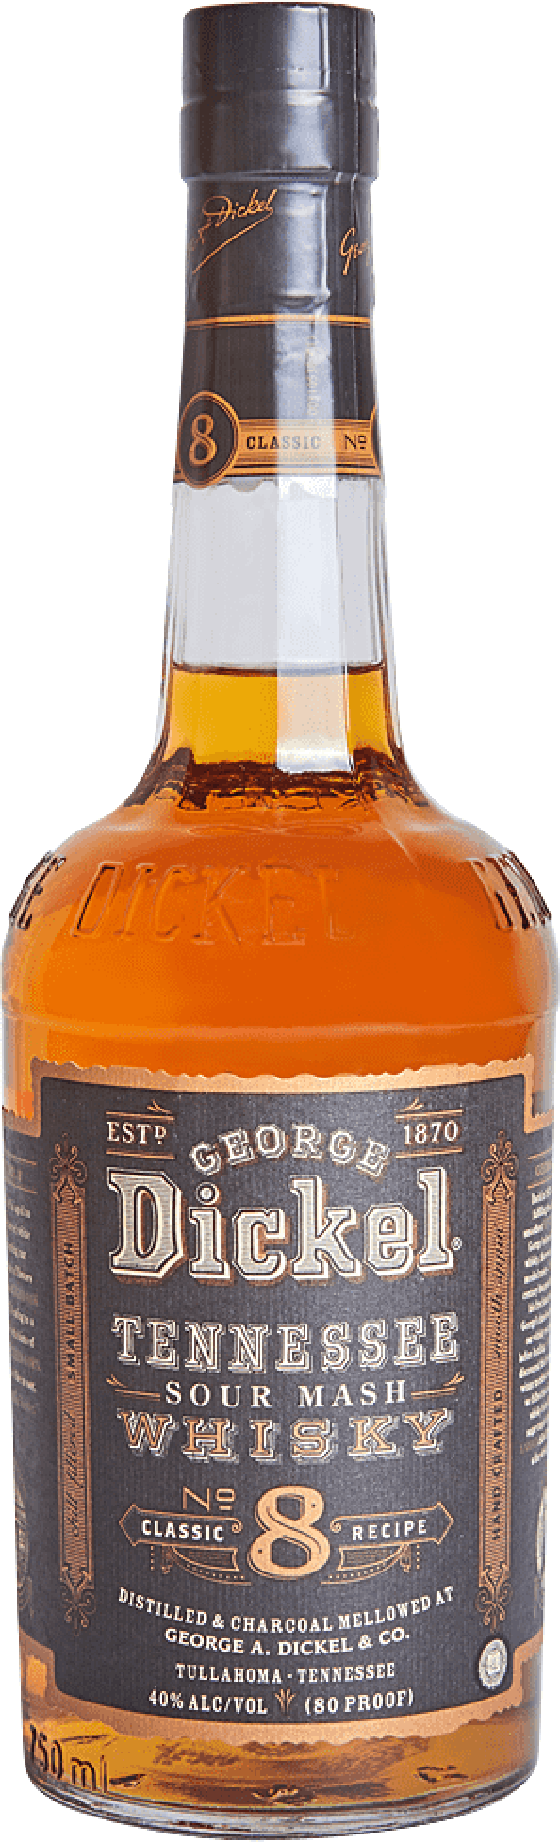 9. George Dickel Classic No.8 Sour Mash Tennessee Whiskey